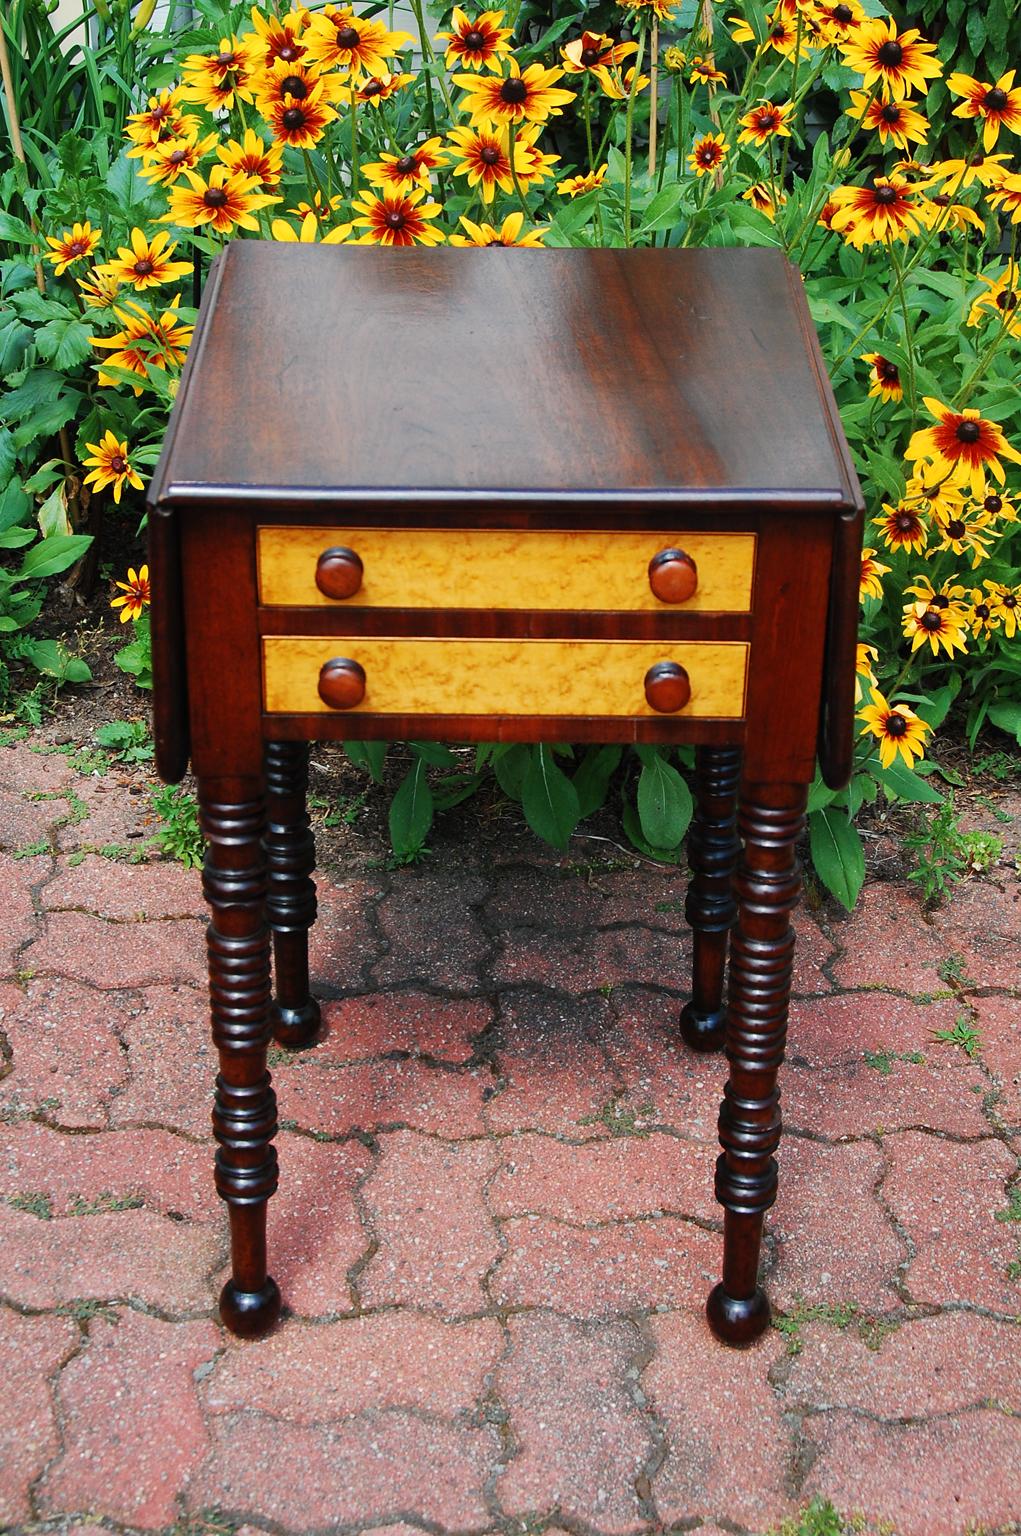 American Sheraton dropleaf mahogany two drawer worktable with birdseye maple drawer fronts and original mahogany turned knobs. This country table continues the Sheraton gestalt with somewhat bolder ring turnings to the legs than would have been done